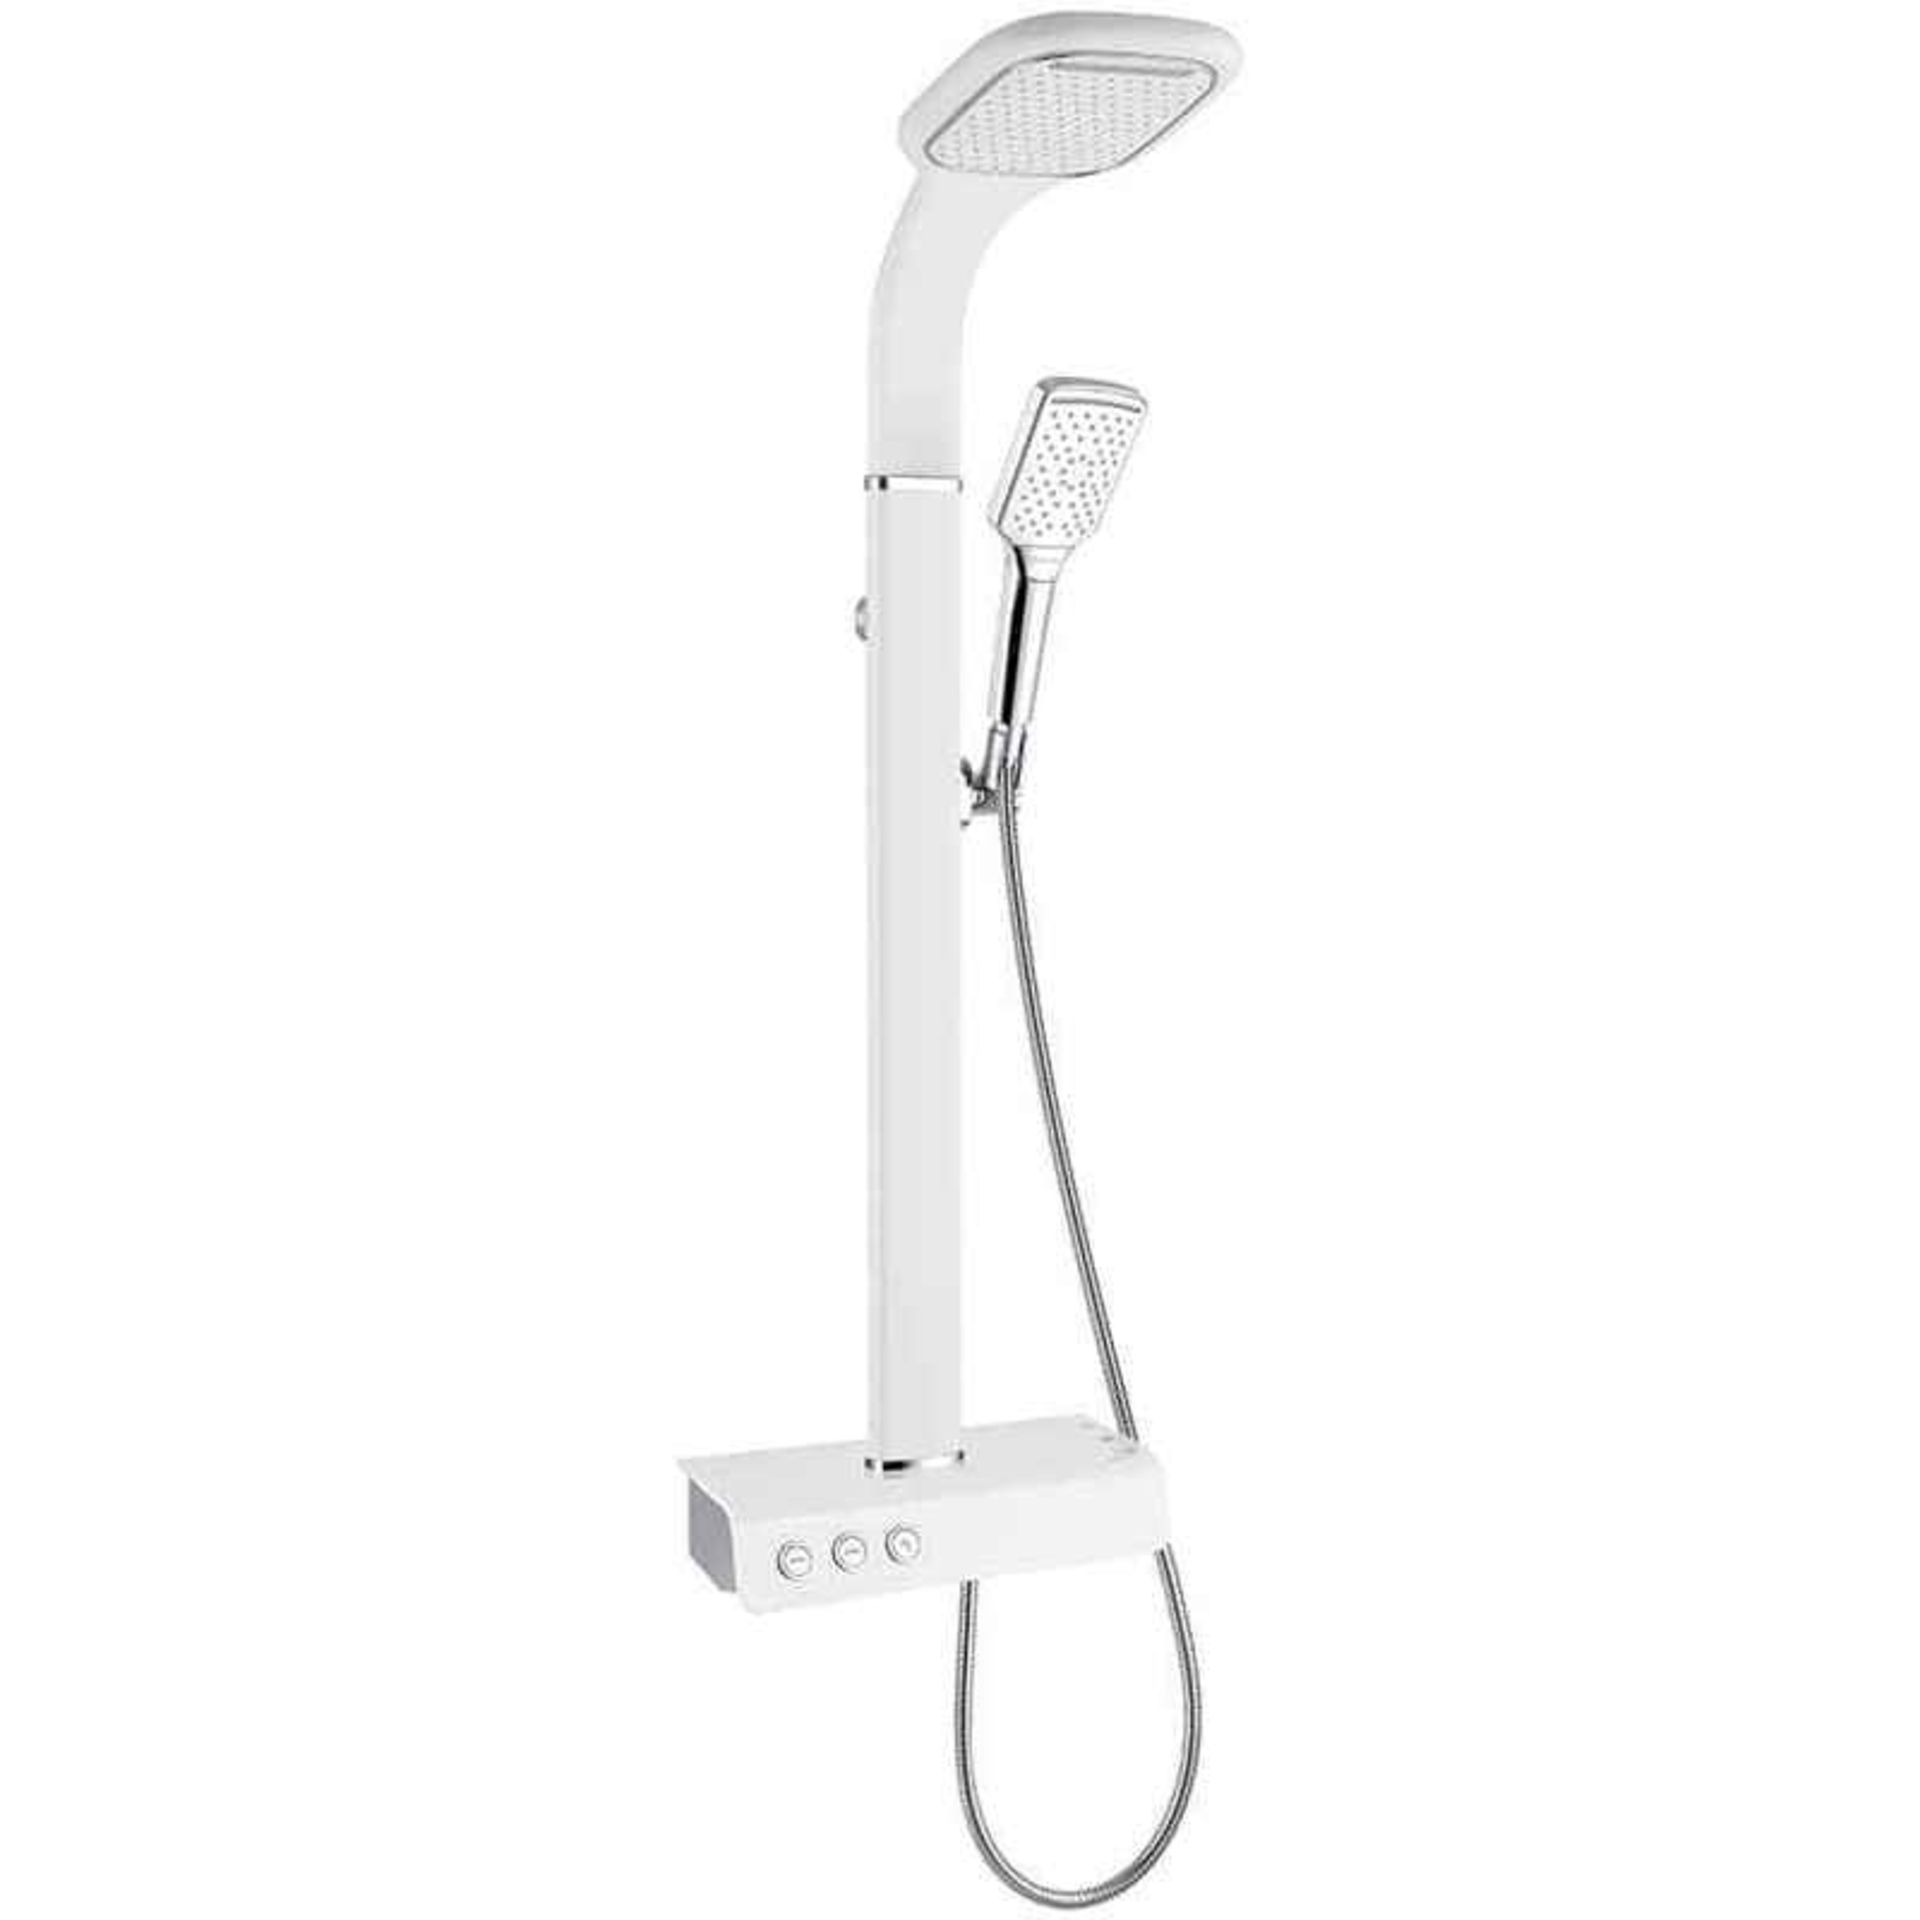 1 x Synergy Nubian White Thermostatic Shower Panel Kit and Handset - New Boxed Stock - RRP £549! - Image 4 of 6